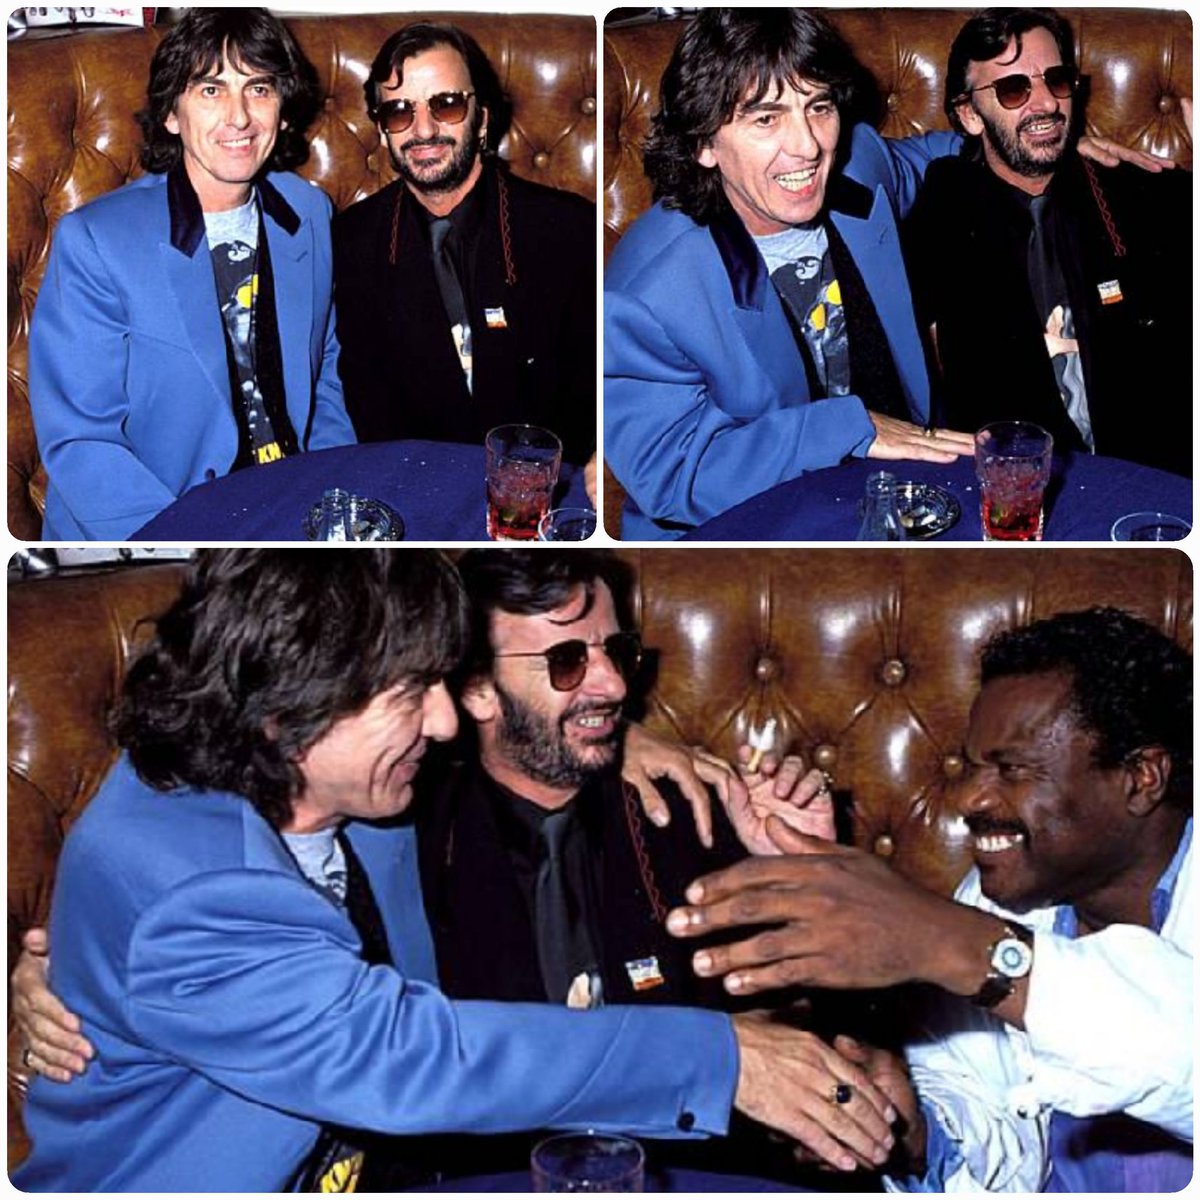 I would have given some of my life's years to have been present at that party 😉 Bonus group hug with Billy 🥰
#BillyPreston #GeorgeHarrison #RingoStarr